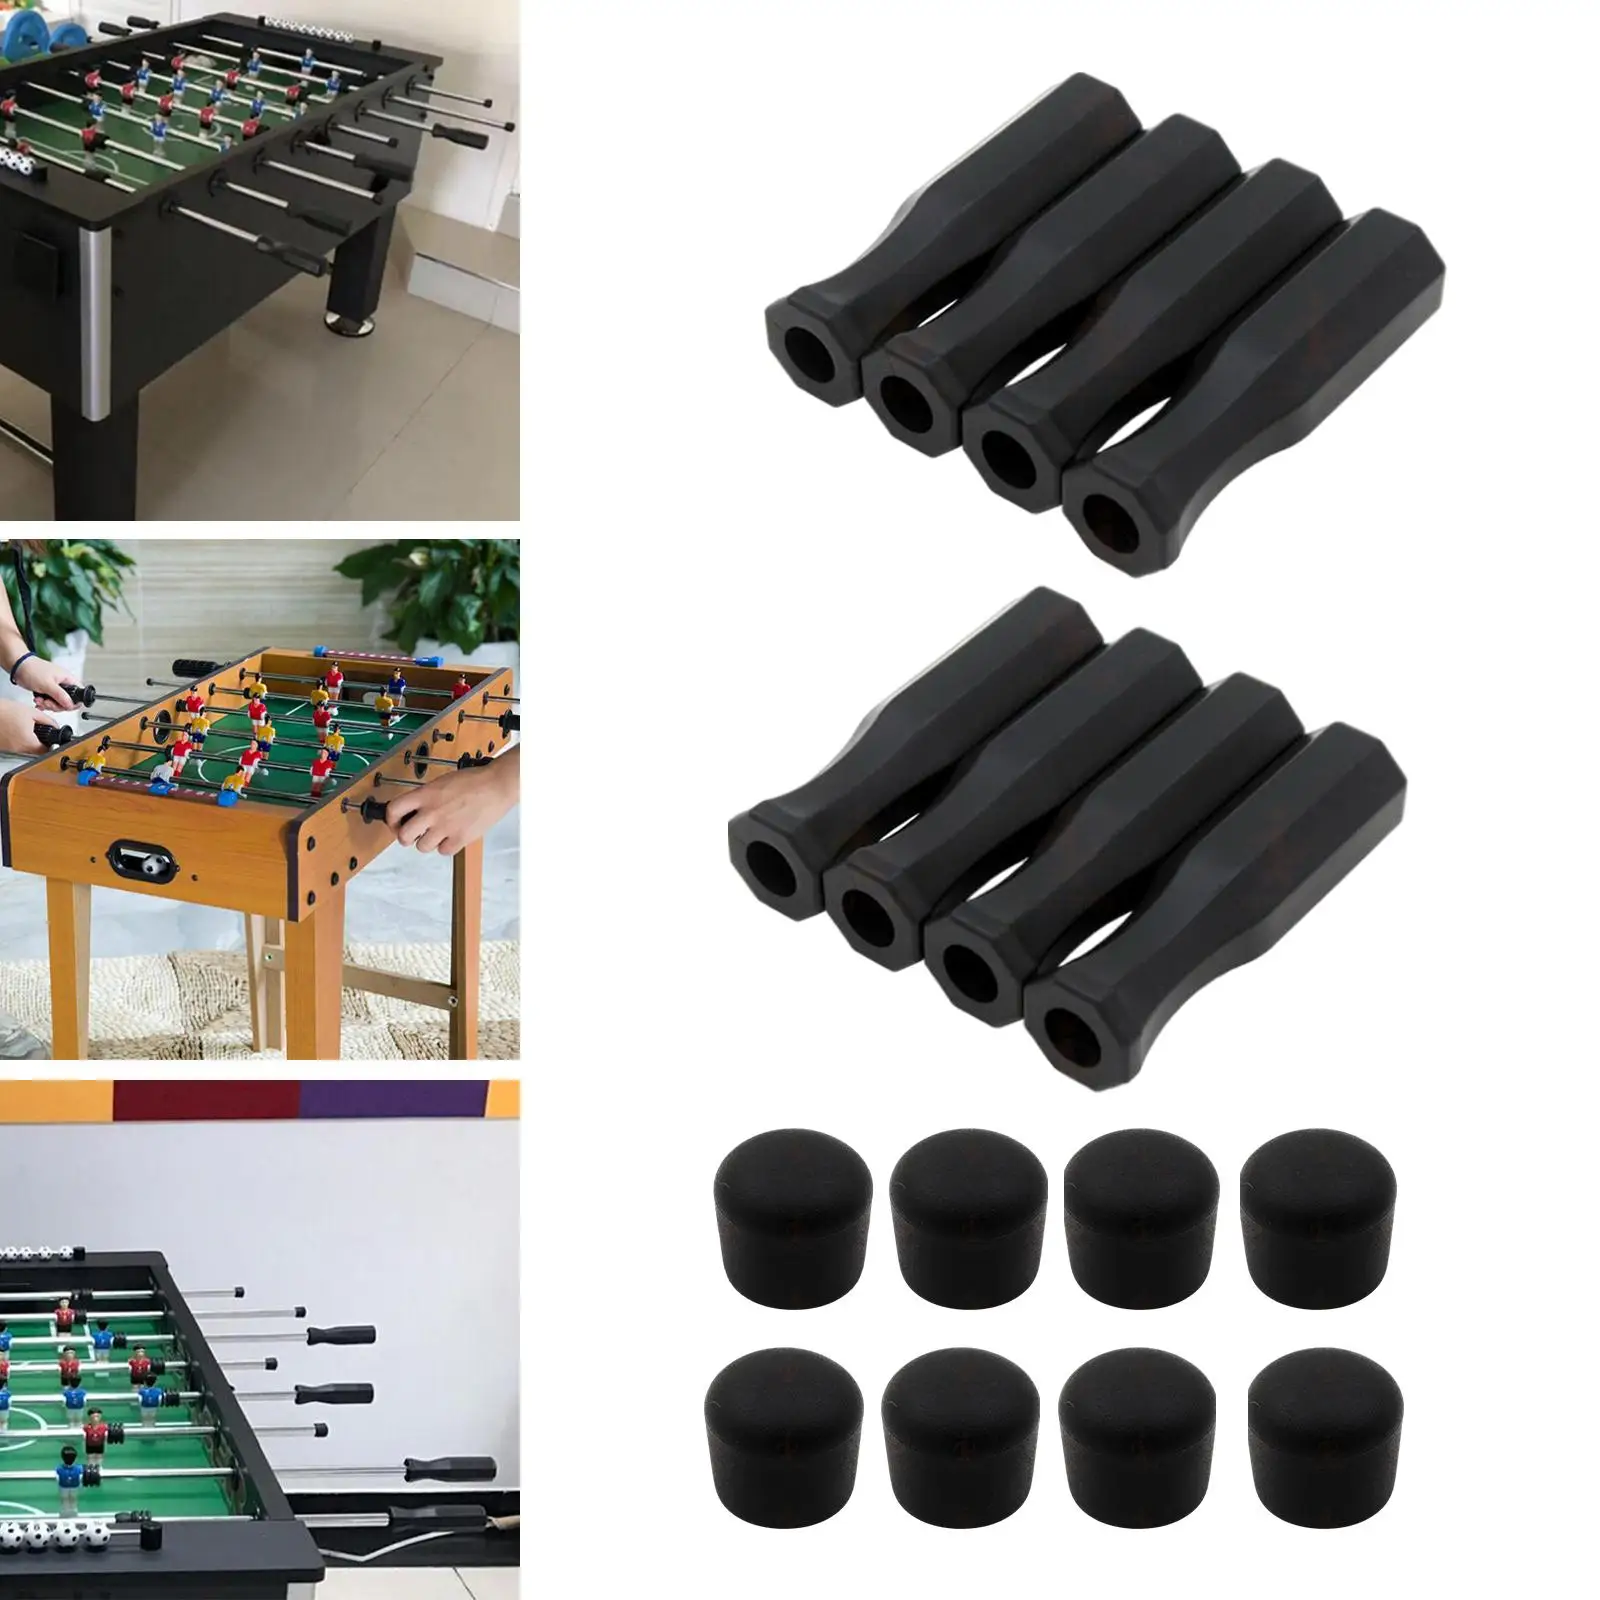 16Pack Premium Octagonal Handles and Safety End Caps Grips Black Accessories for Children